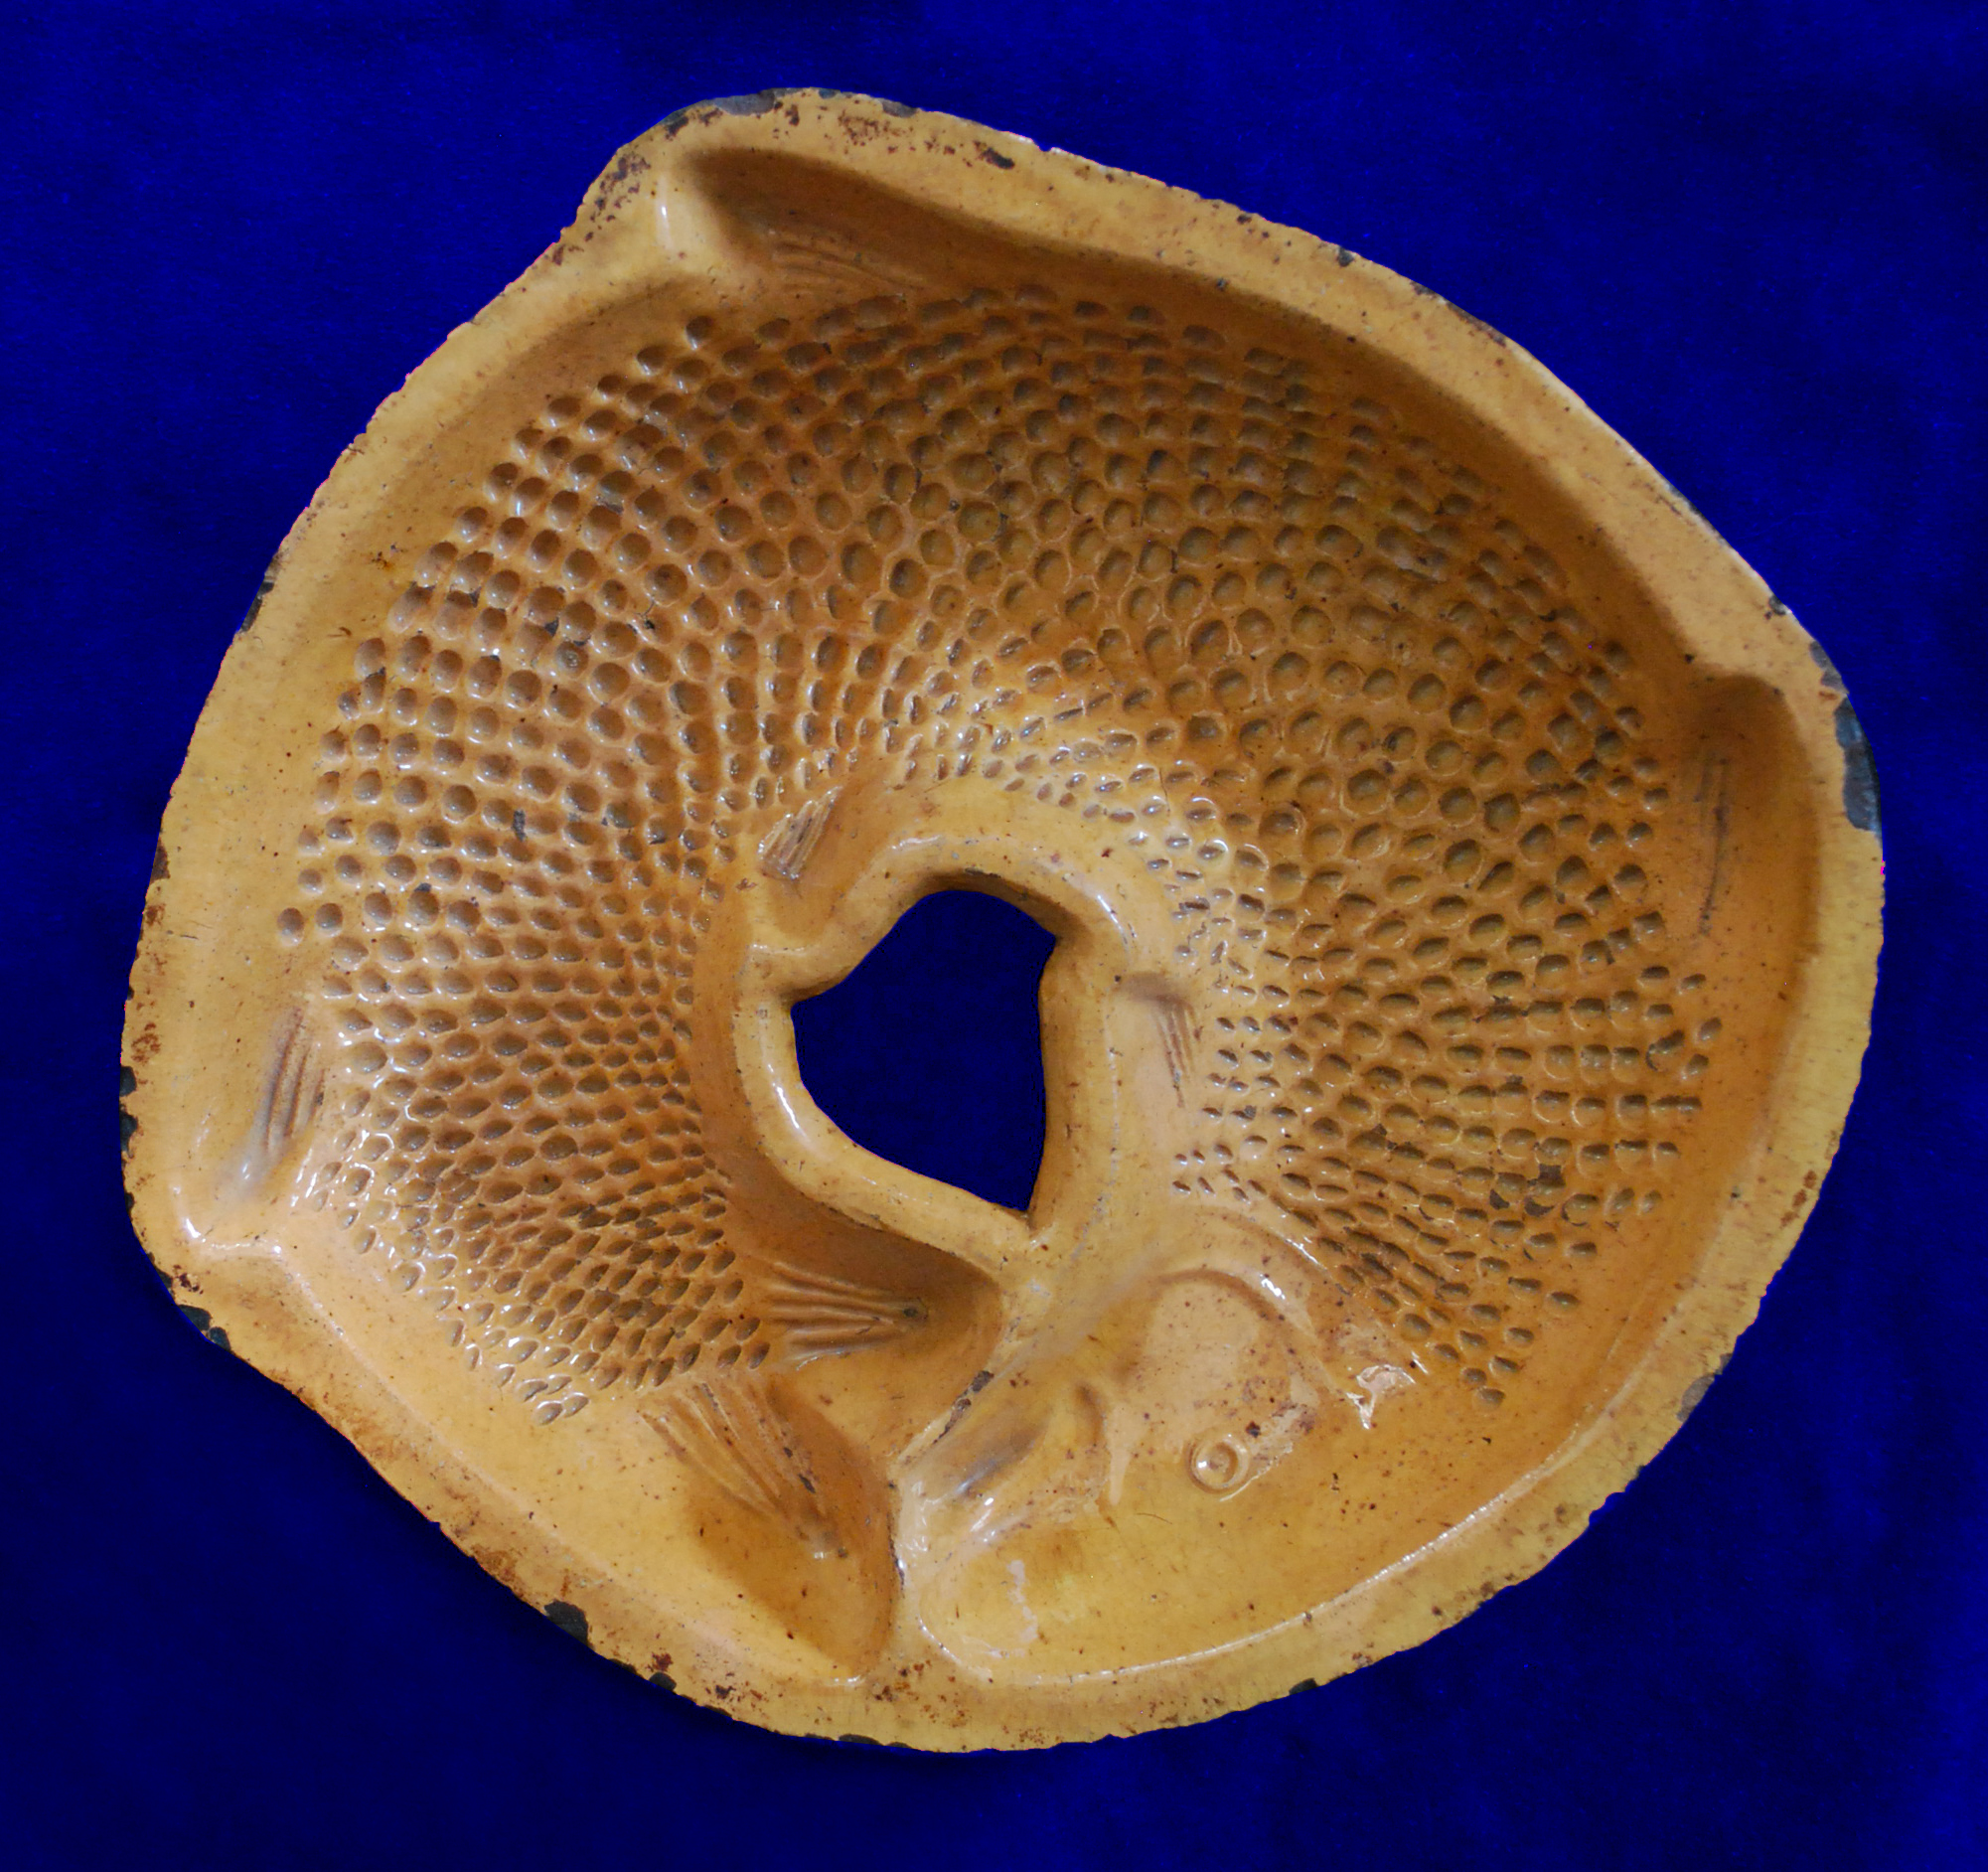 An ocher colored redware dish in the shaped of a fish. The fish’s head meets up with the tail, making the mold a shallow circular shape. There are scales indented into the body, along with fins and facial features. 